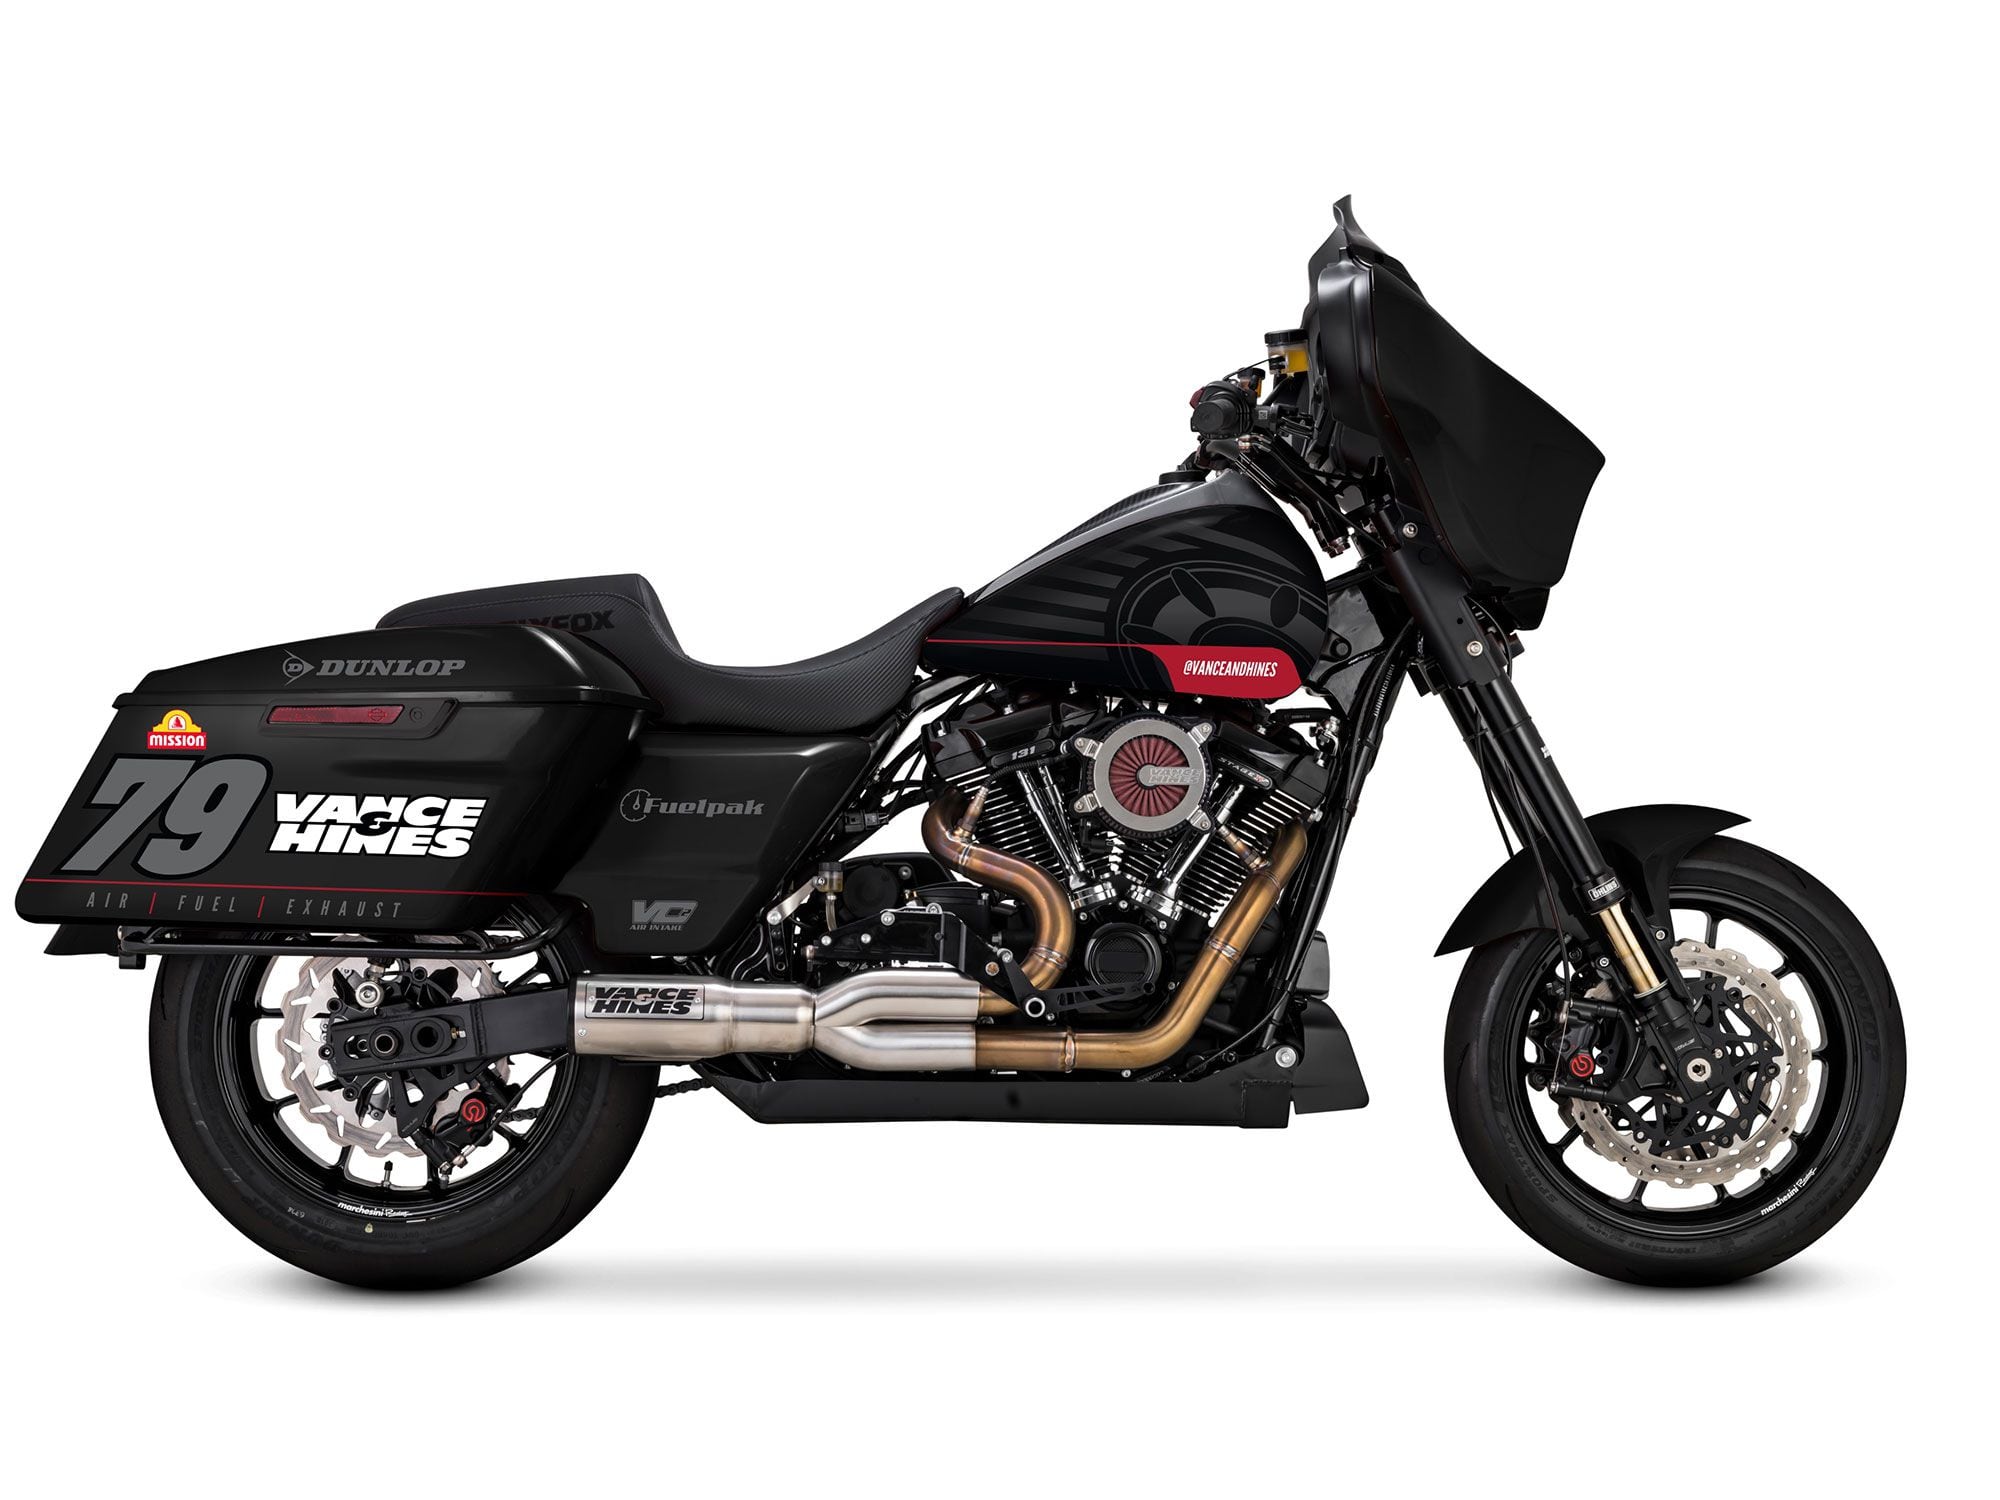 Vance & Hines is returning to the King of the Baggers series for 2021 with a race-prepped Harley Electra Glide.